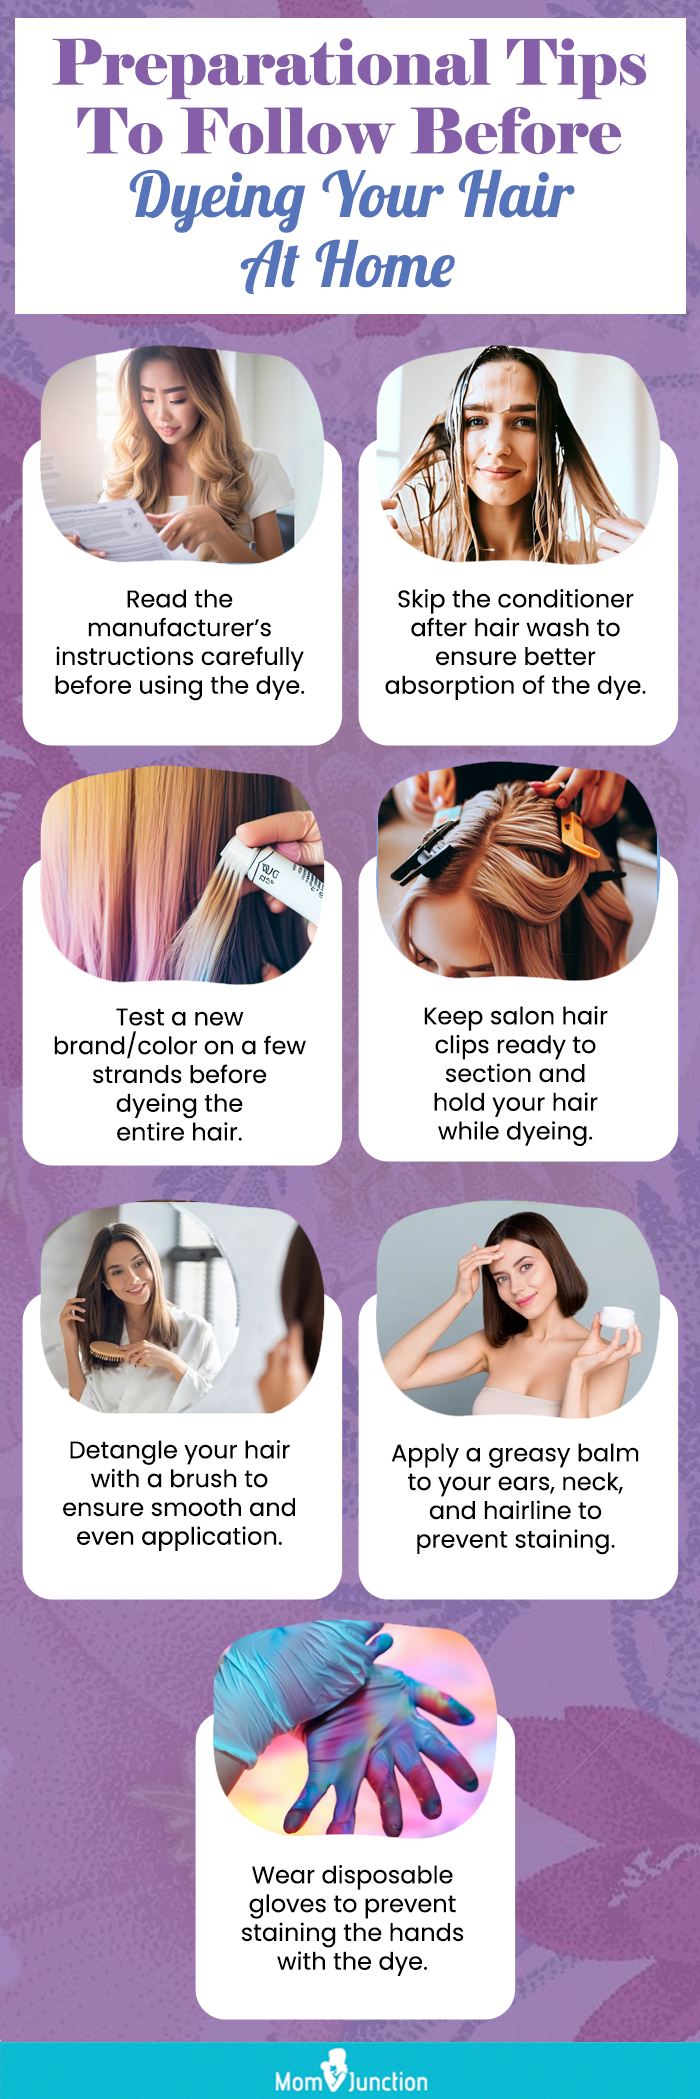 Preparational Tips To Follow Before Dyeing Your Hair At Home (infographic)